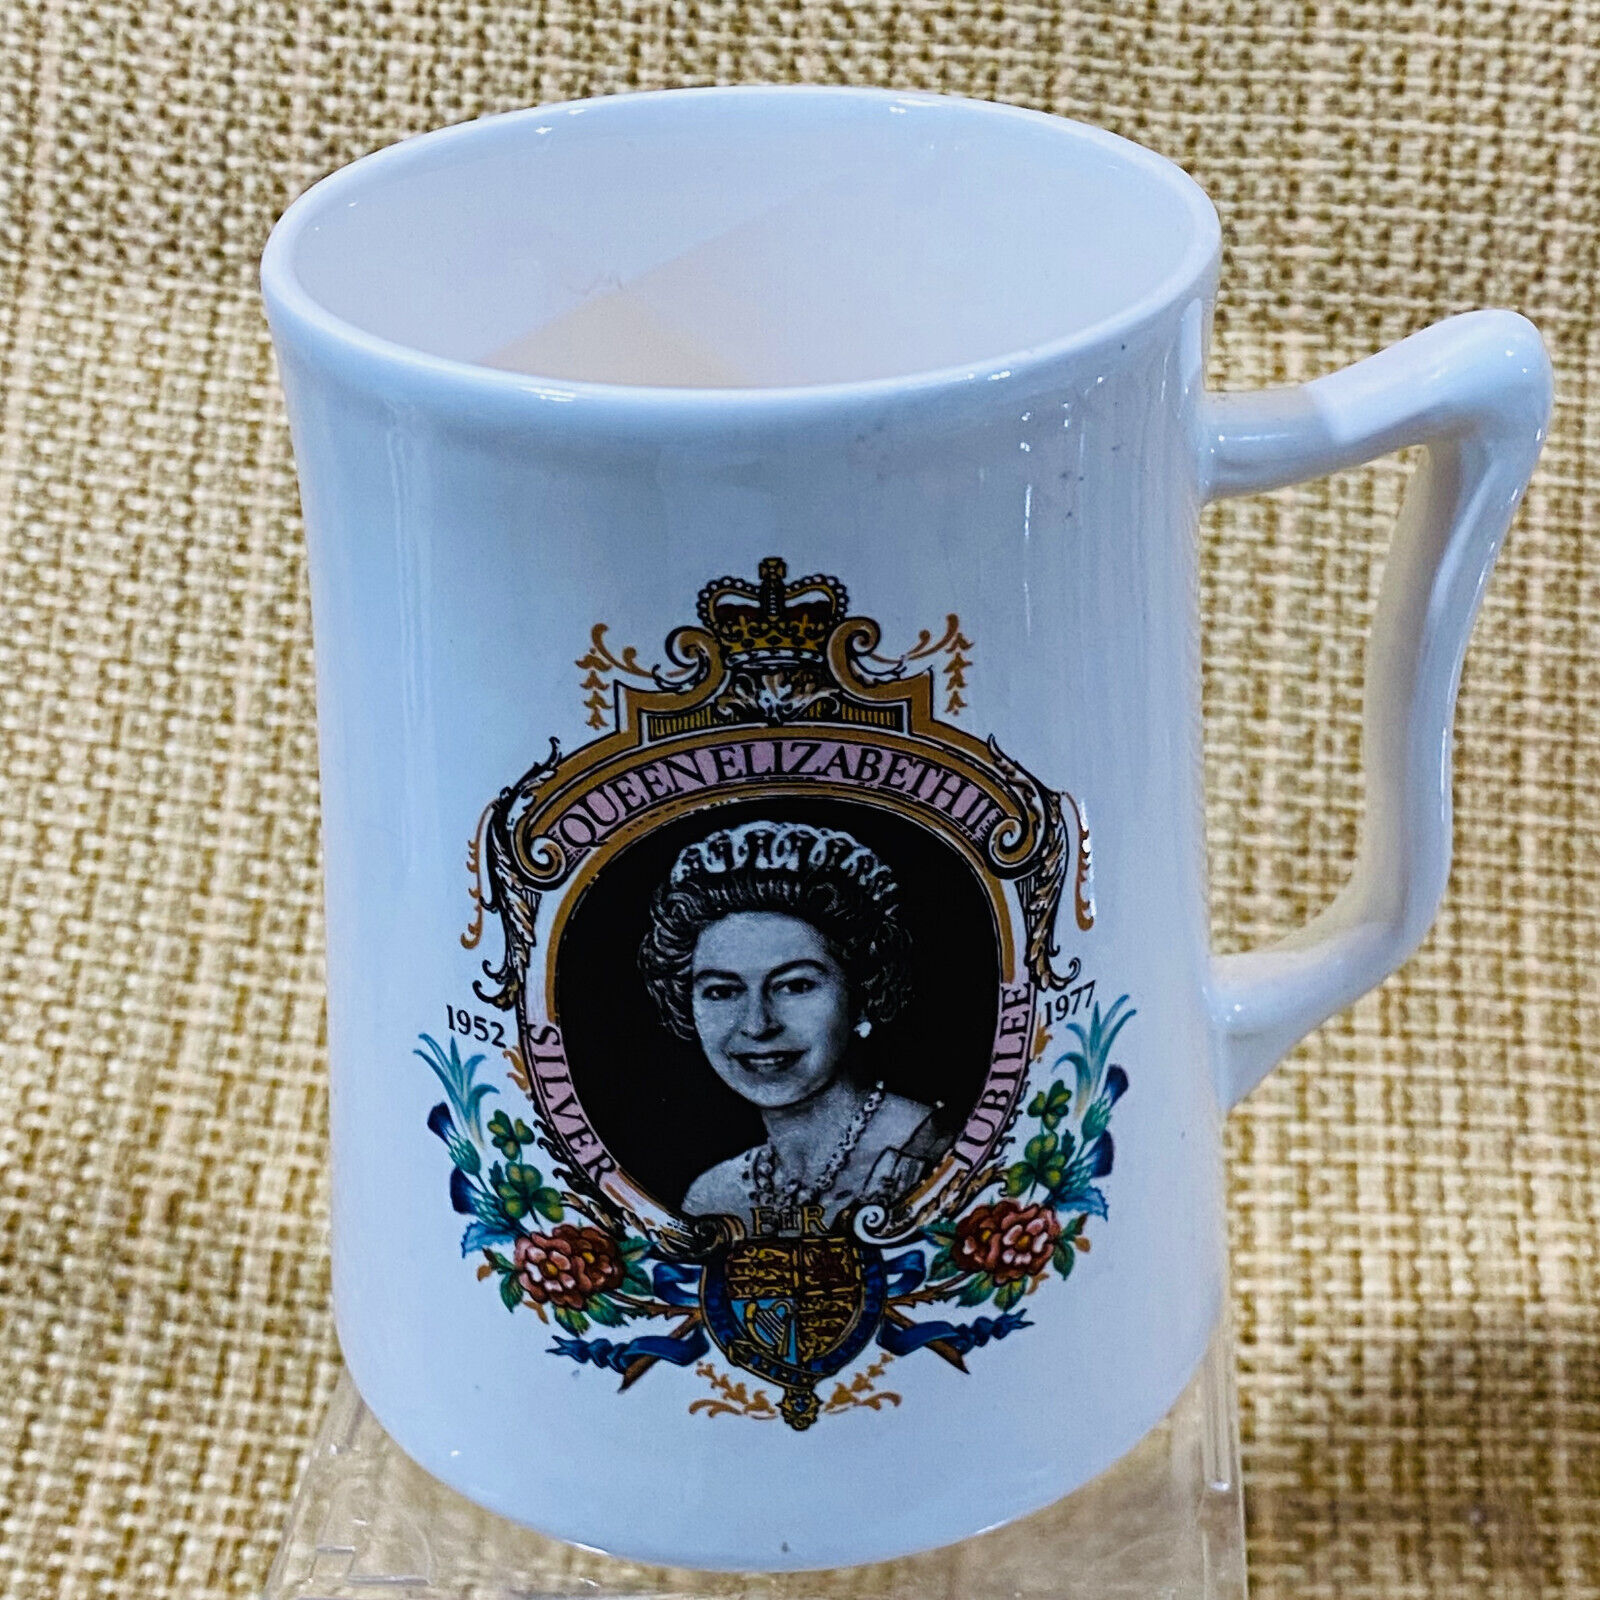 Queen Elizabeth II Silver Jubilee 1952-1977 Cup Withernsea Pottery England